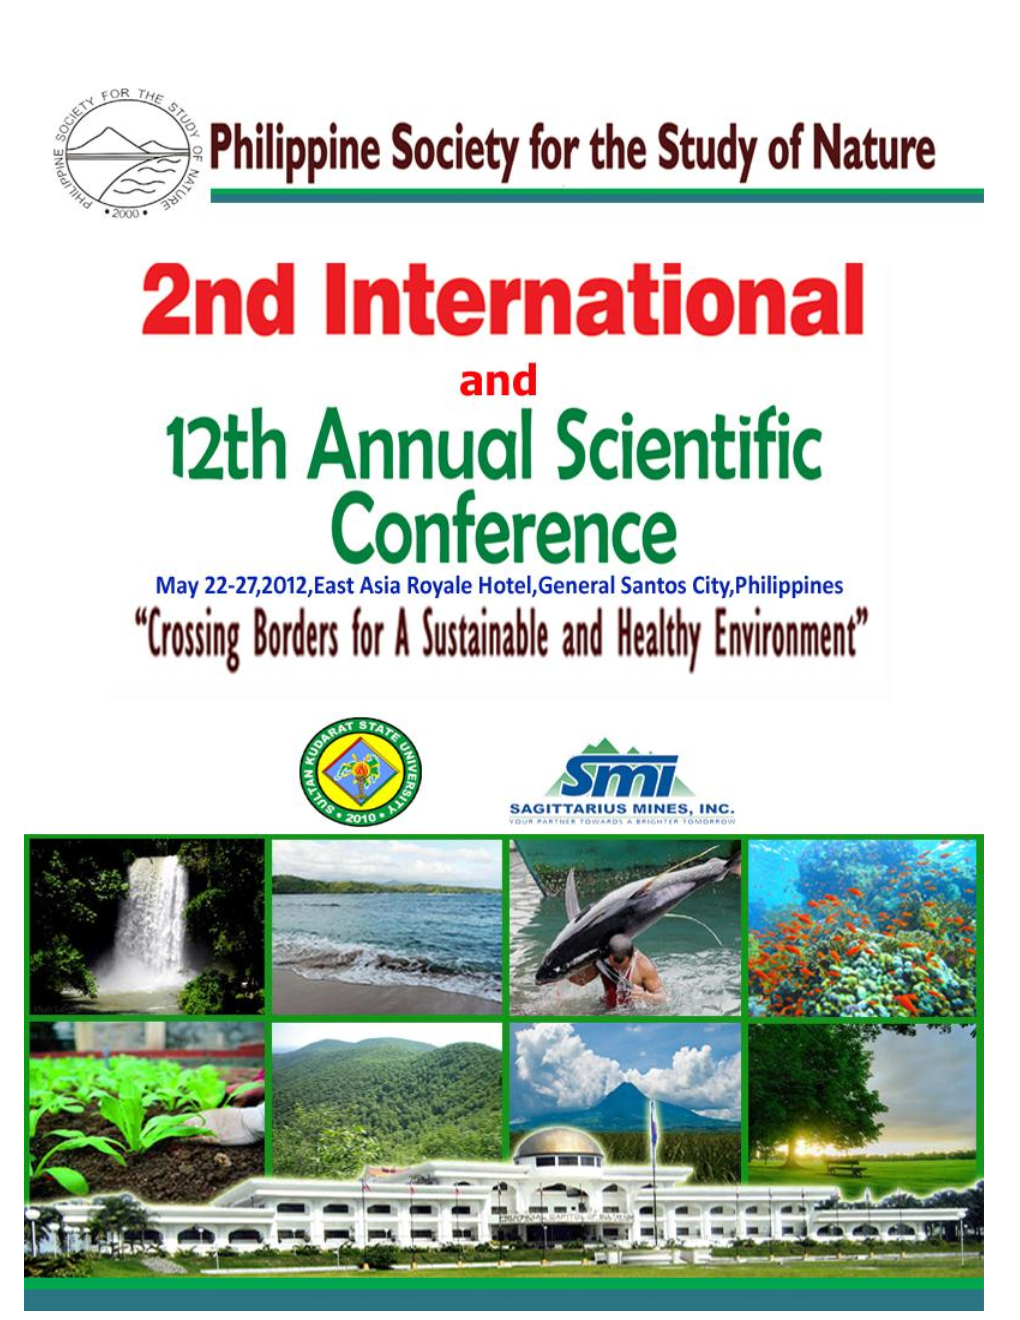 Philippine Society for the Study of Nature, (PSSN) Inc. 2Nd